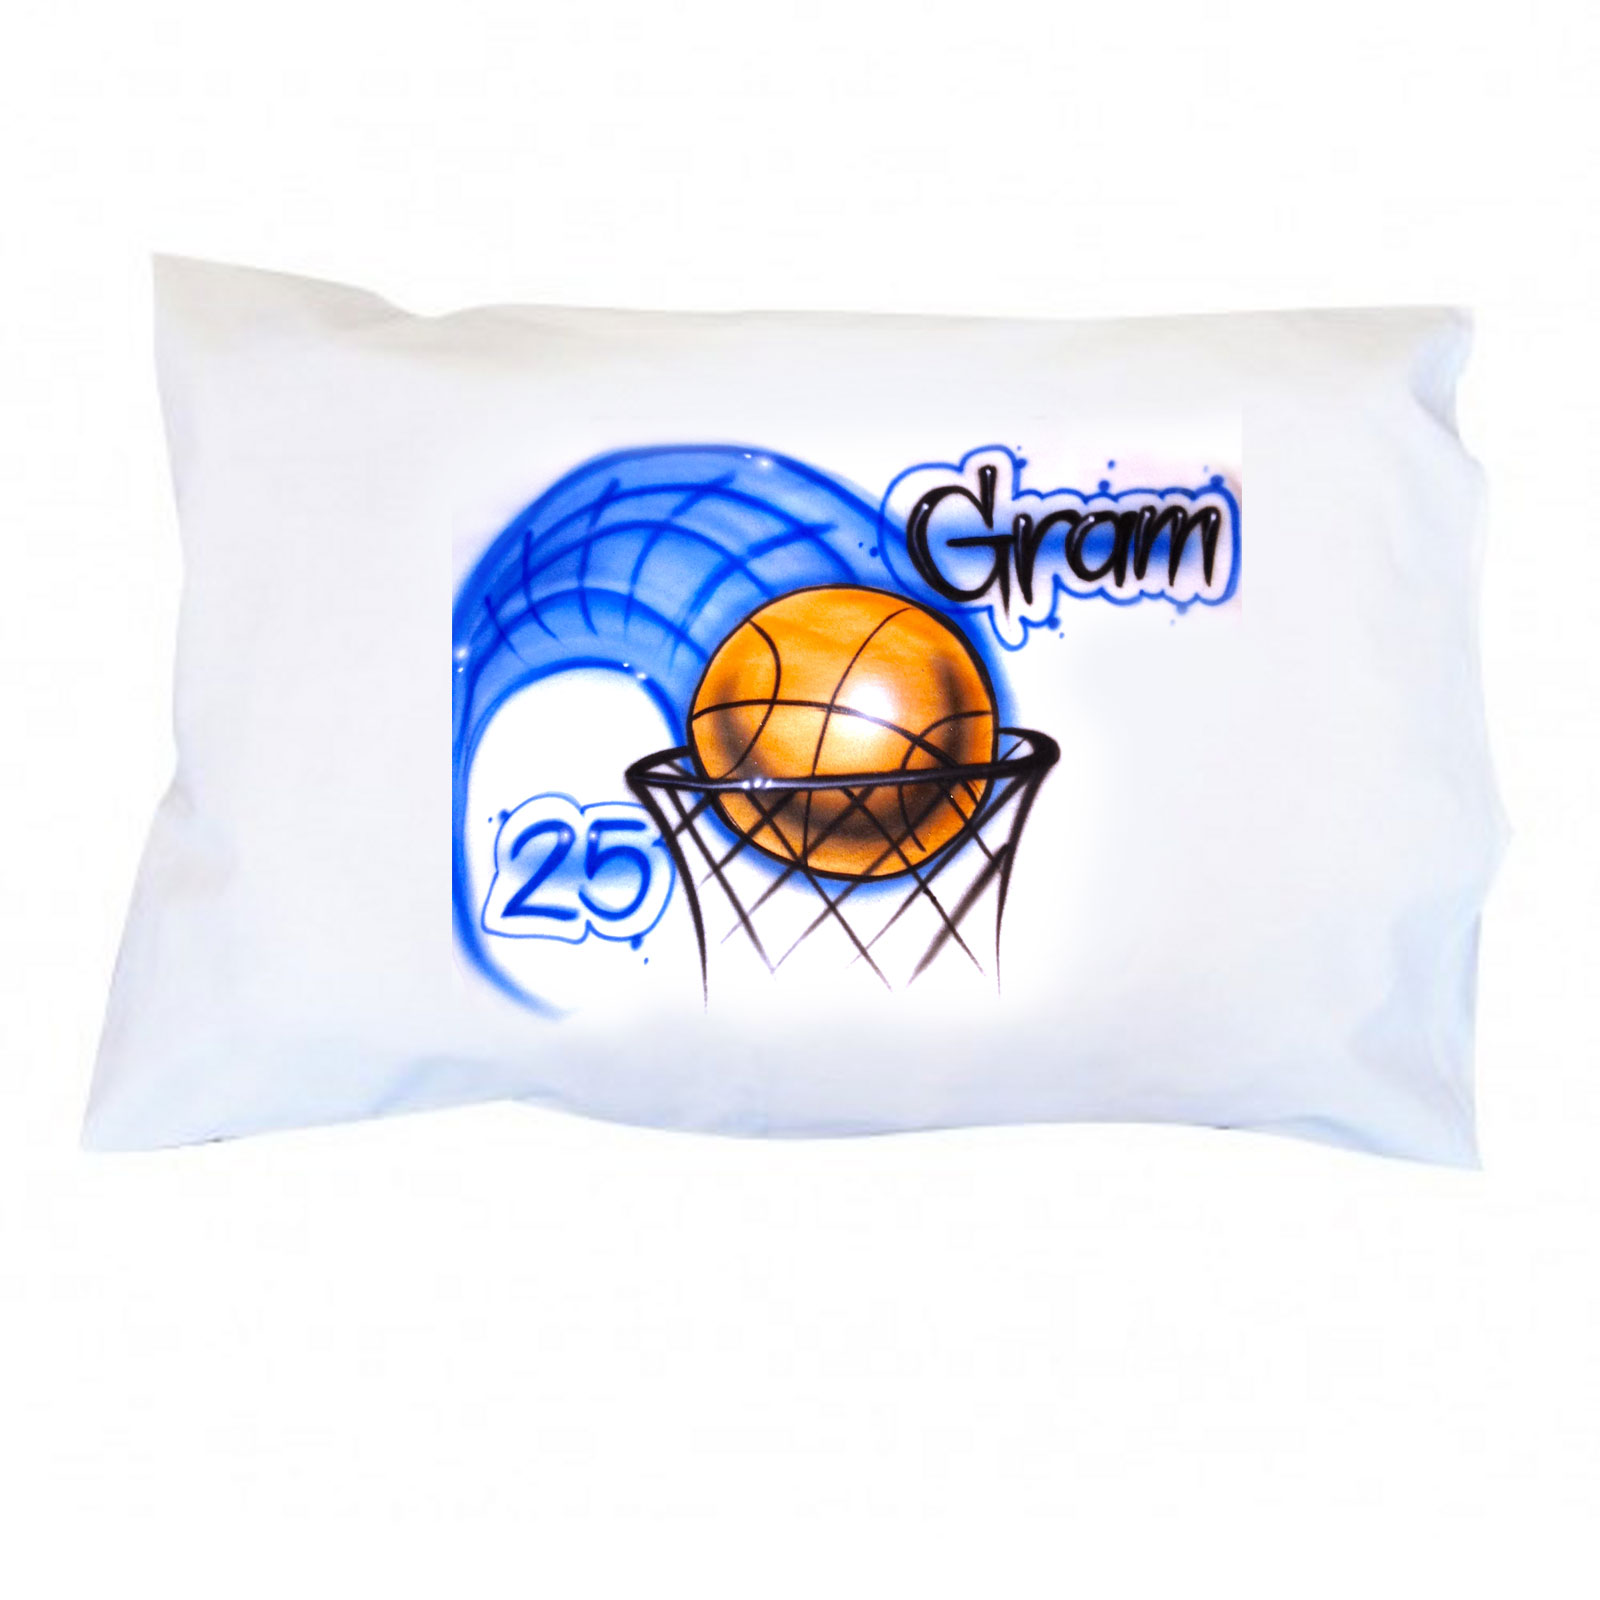 Airbrushed Pillowcases